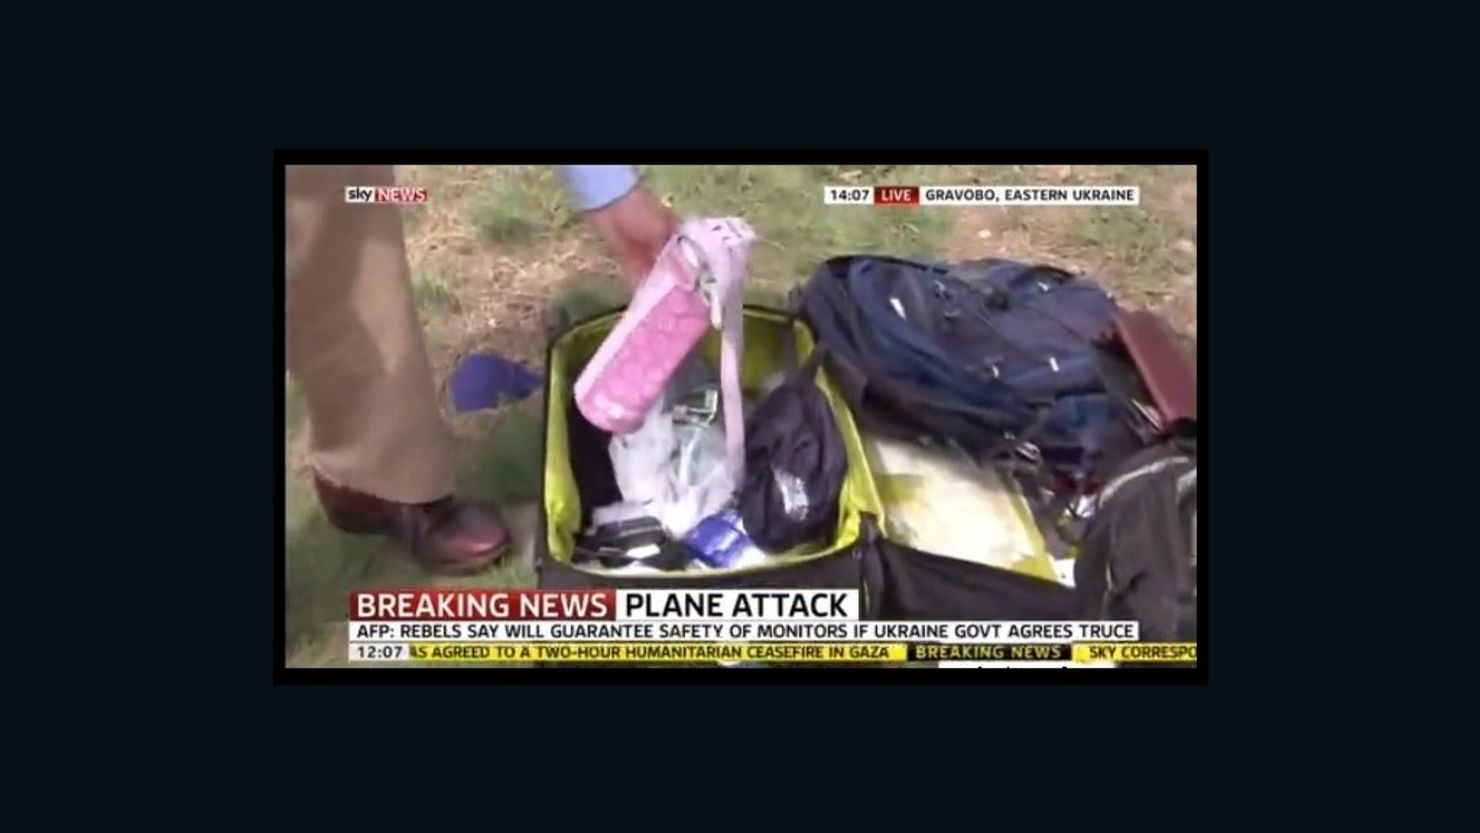 A reporter picks up the belongings of MH17 victims during a live Sky News broadcast at the crash site in eastern Ukraine.